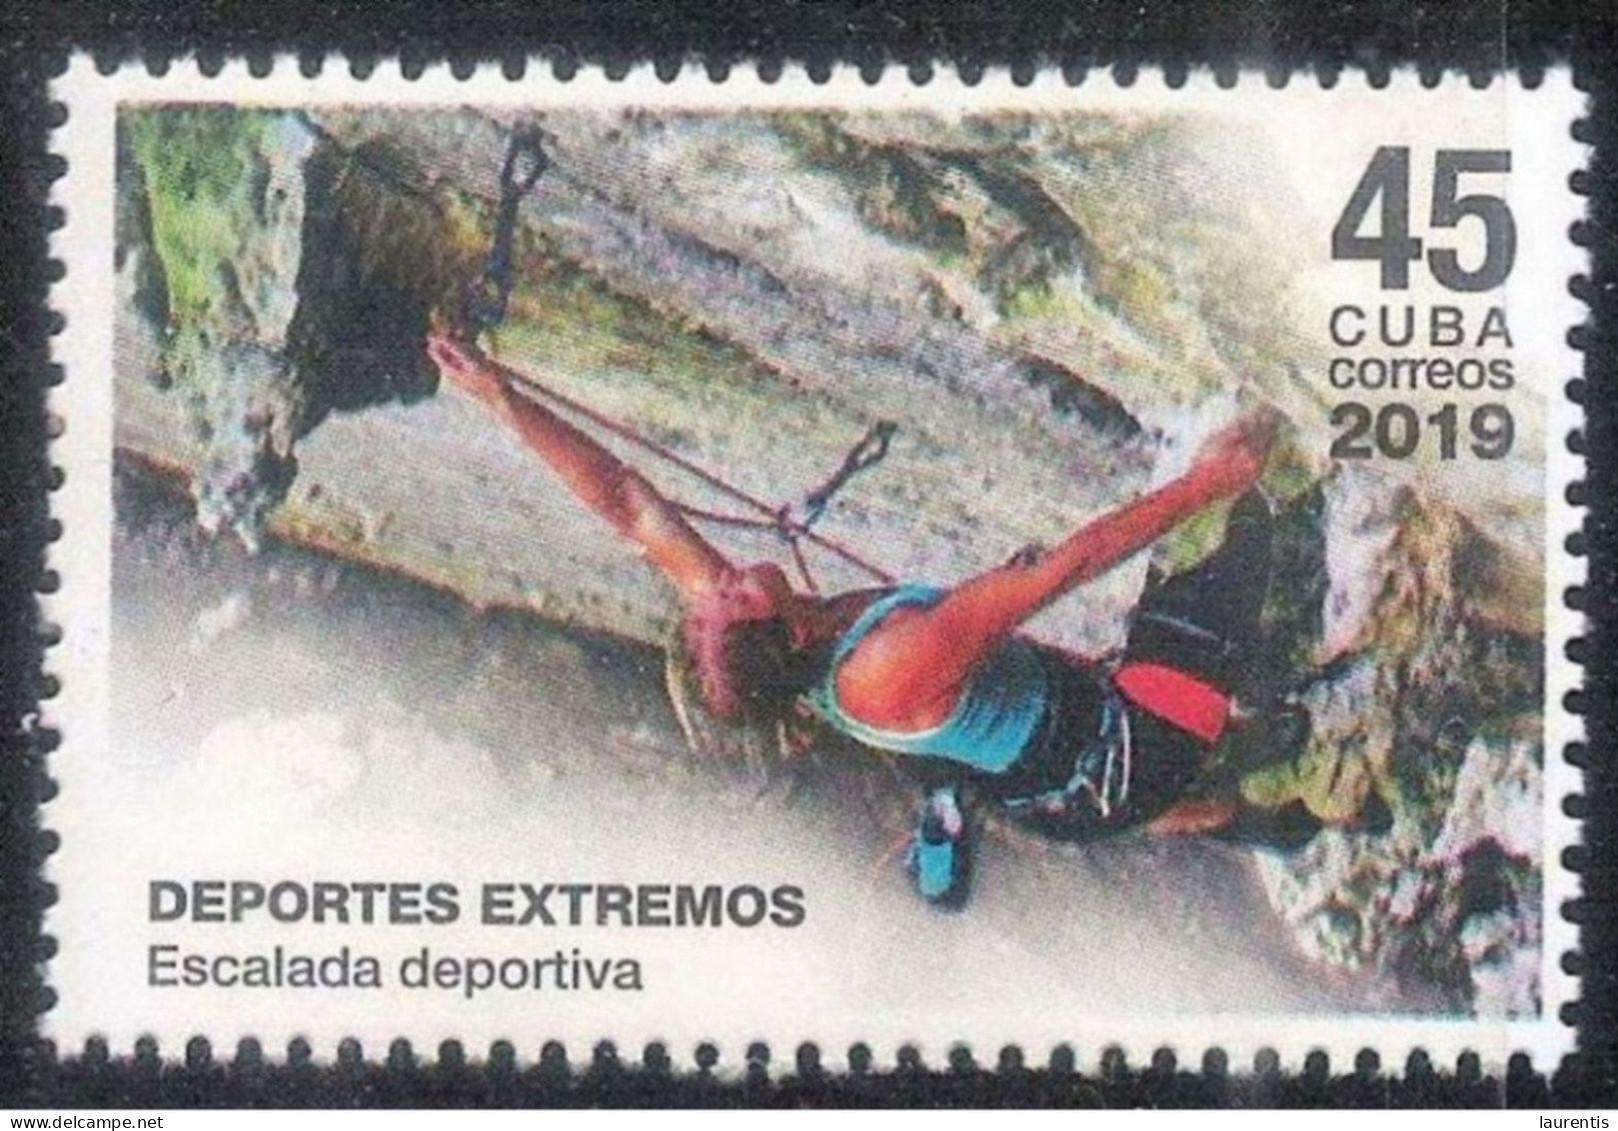 1253  Climbing - Only This One In The Stamp Set - MNH - Cb - 1,25 - Bergsteigen